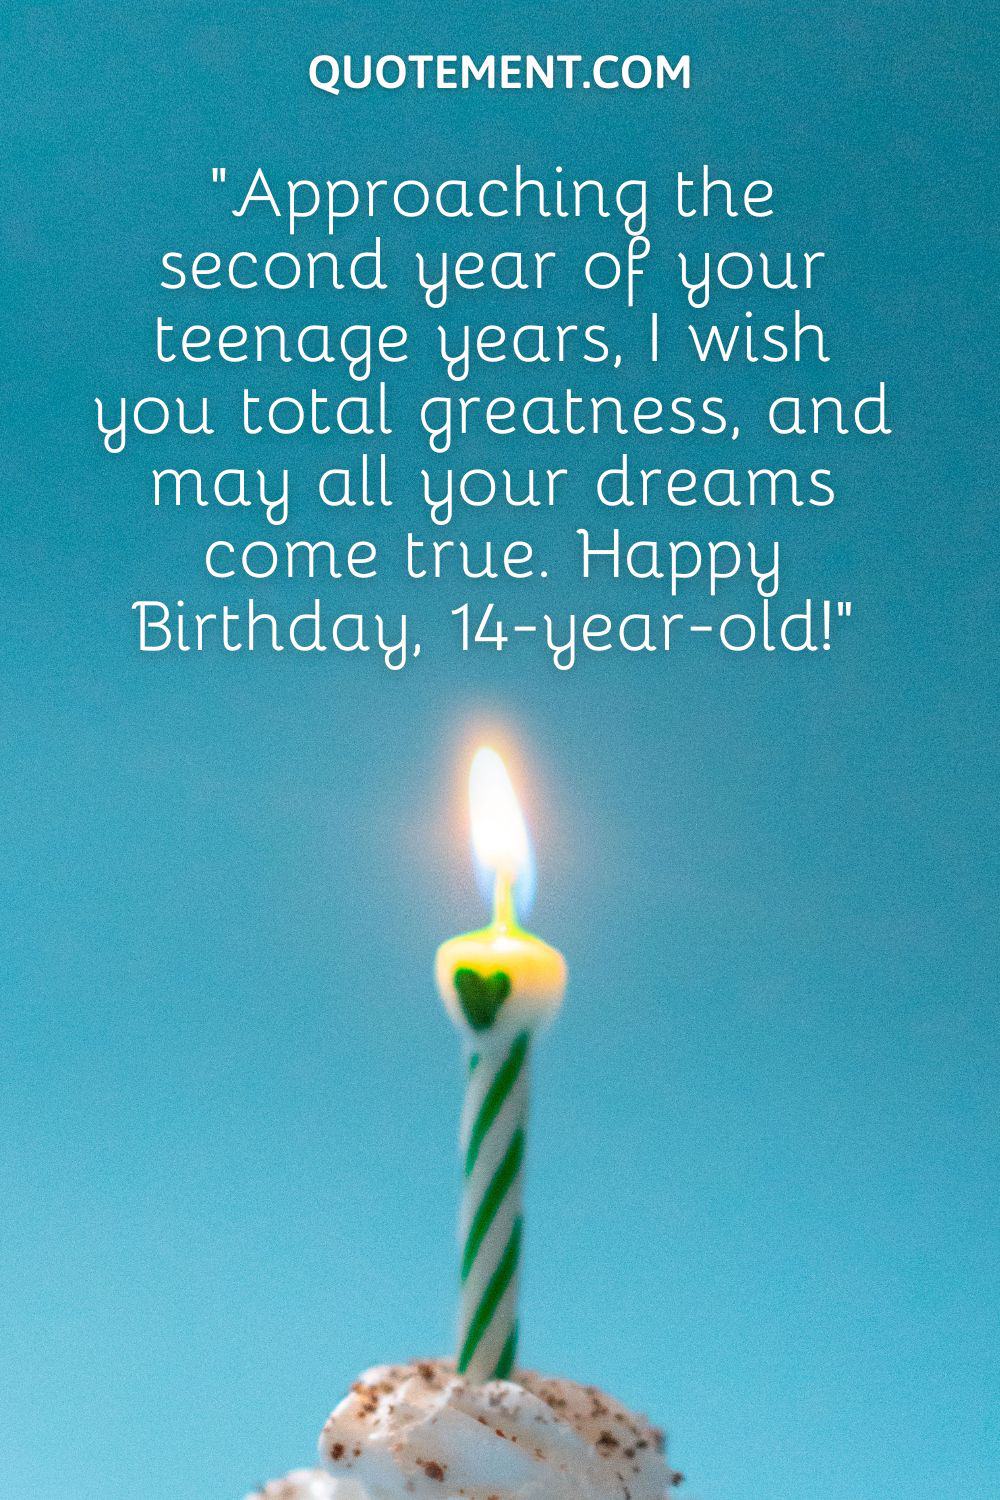 “Approaching the second year of your teenage years, I wish you total greatness, and may all your dreams come true. Happy Birthday, 14-year-old!”